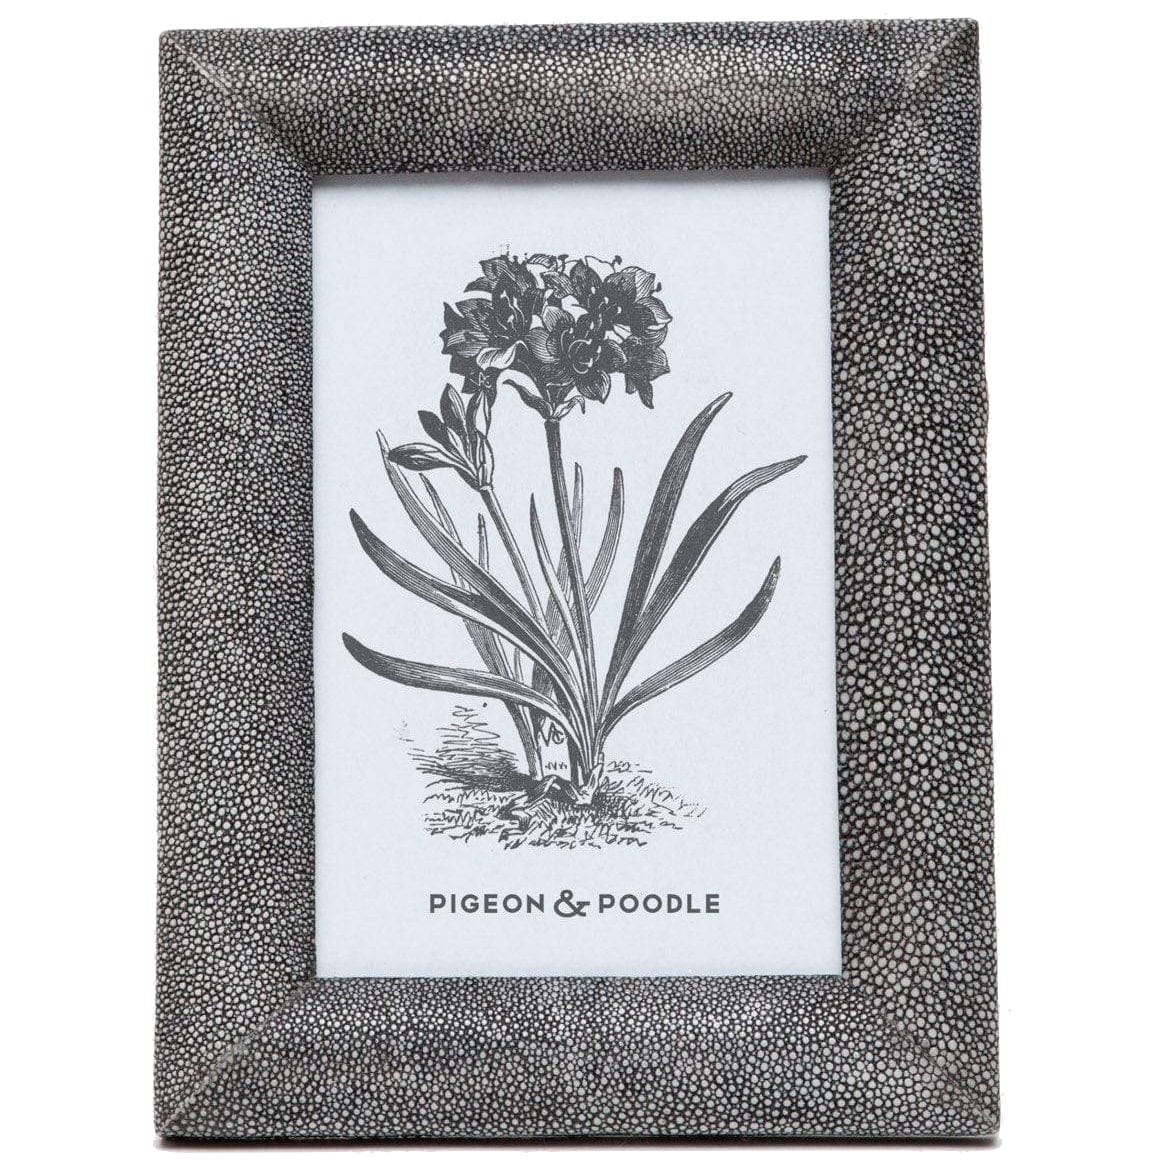 Pigeon & Poodle Oxford Picture Frame Pillow & Decor